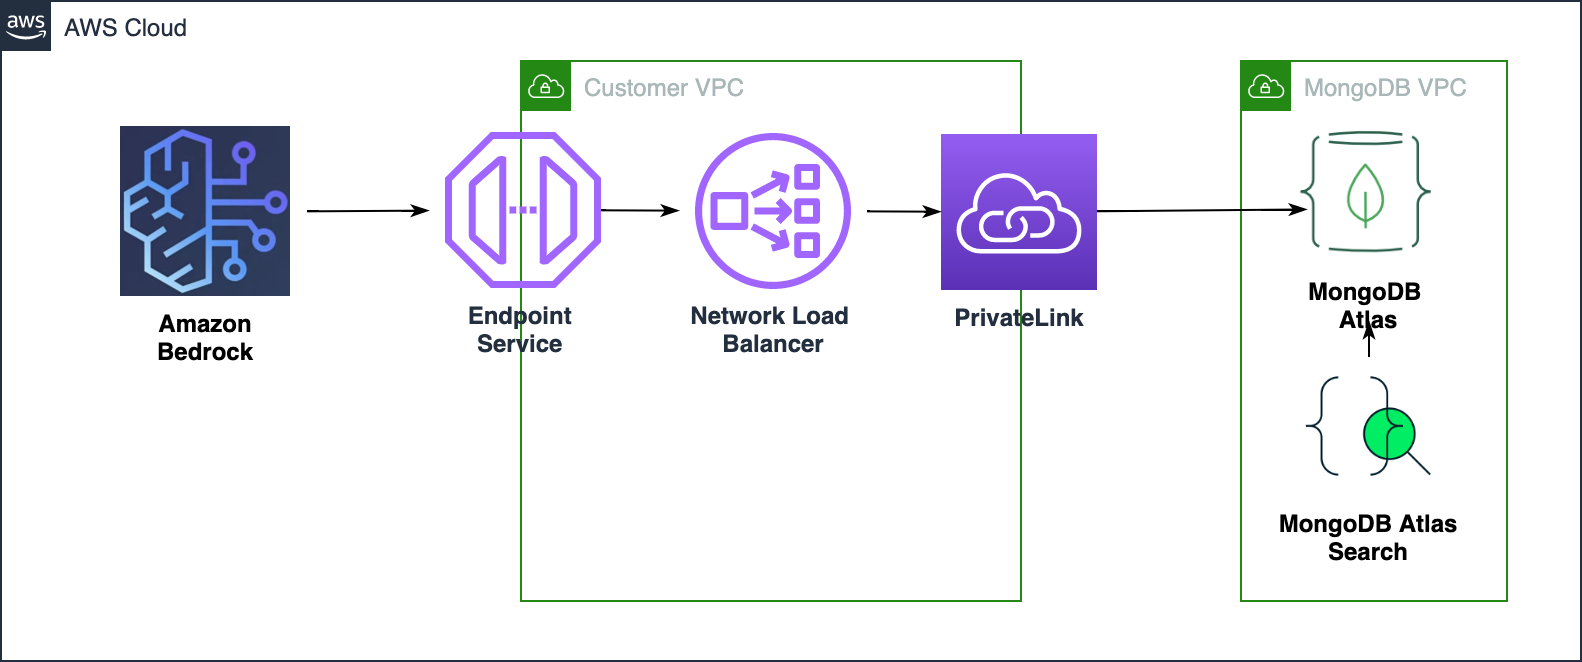 Solution architecture diagram of the Amazon Bedrock Knowledge Base with PrivateLink connecting to MongoDB Atlas